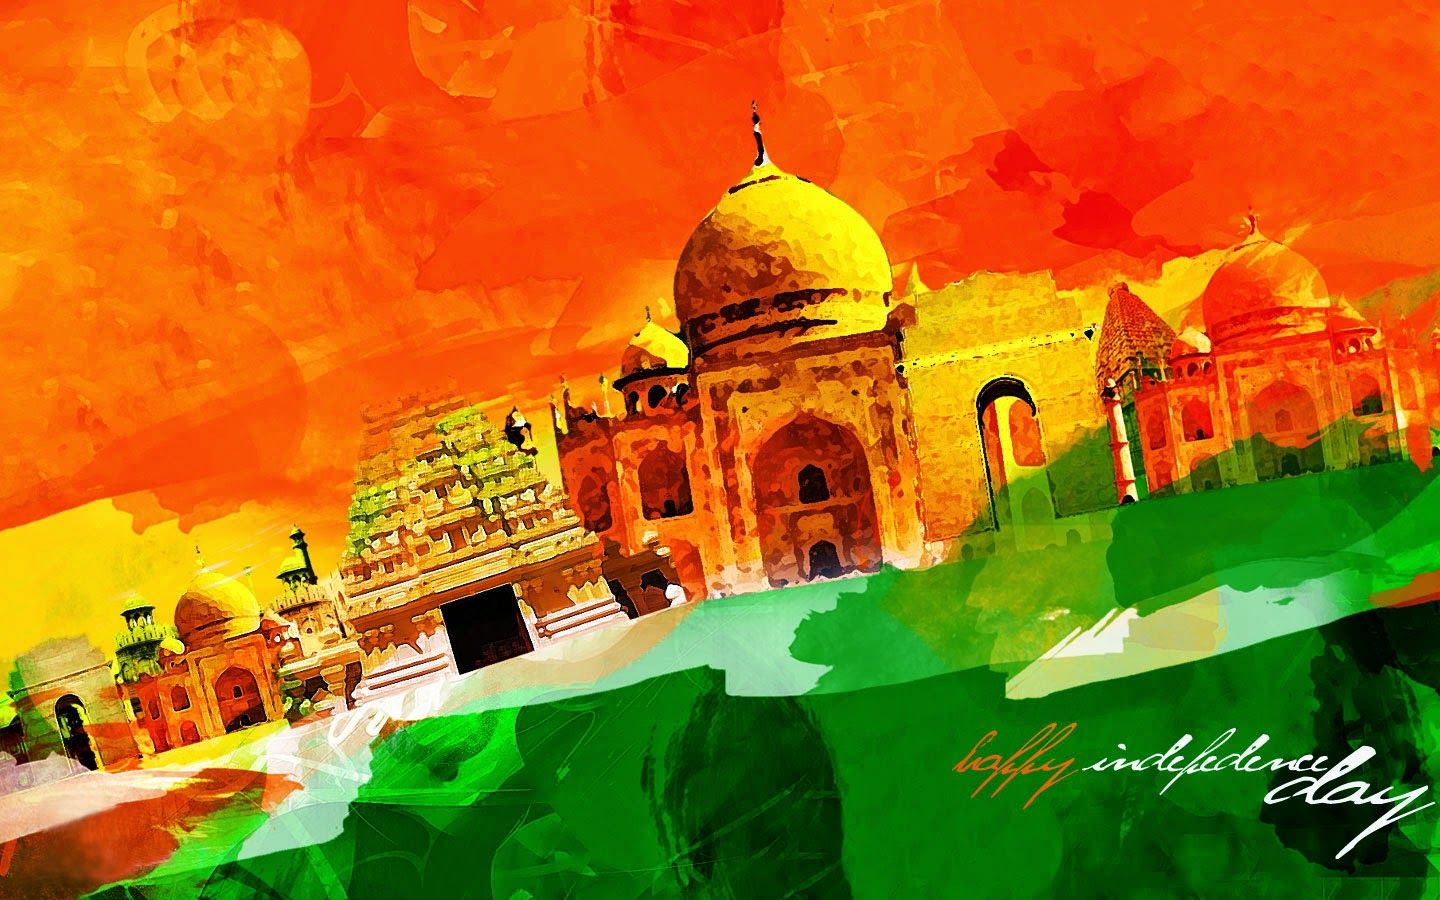 Independence Day Wallpaper India August 1947 Infotainment, Jobs, Tourism, Telugu Stories, Personality Development